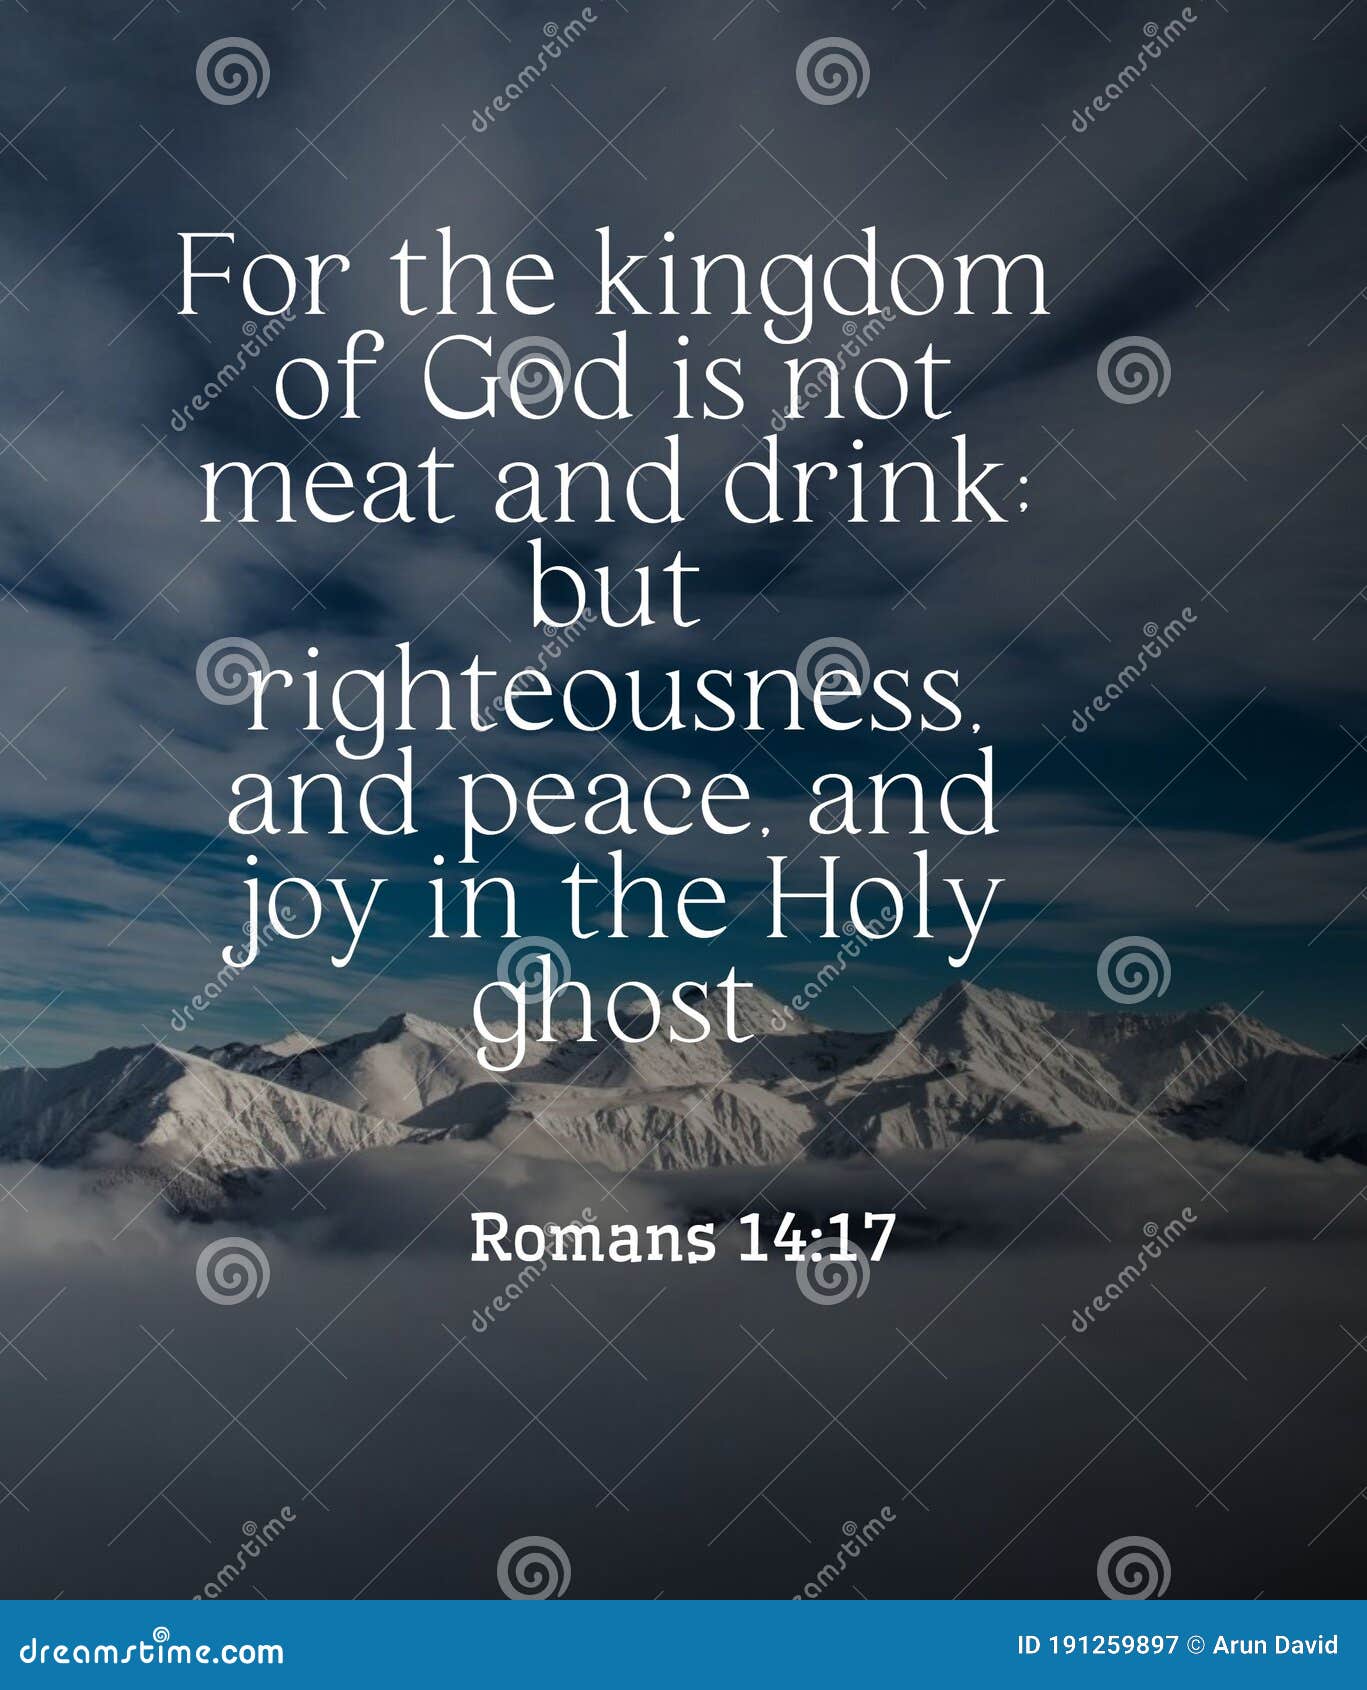 bible words ` for the kingdom of god is not meart and  drink but righteousness and peace and joy in the holy ghost  romans 14:17